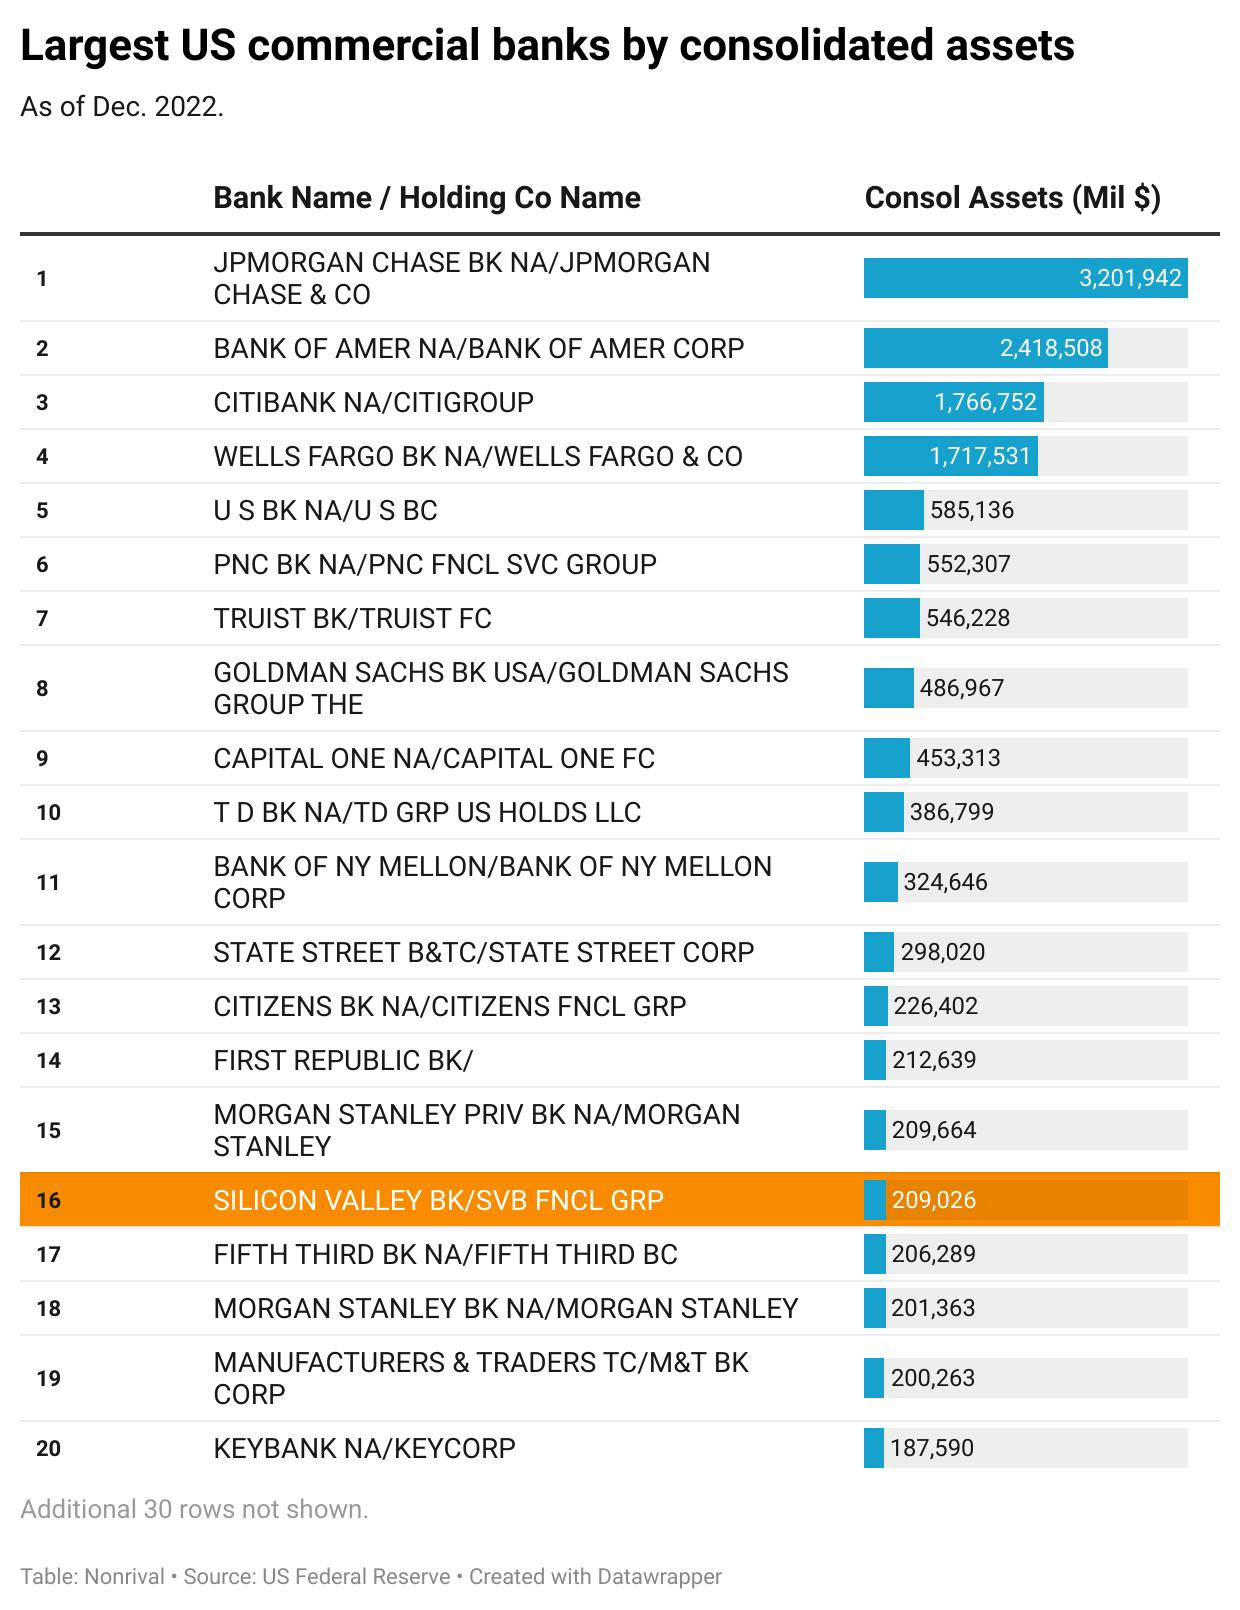 Silicon Valley Bank ranked 16th by total assets among US banks as of Dec 2022